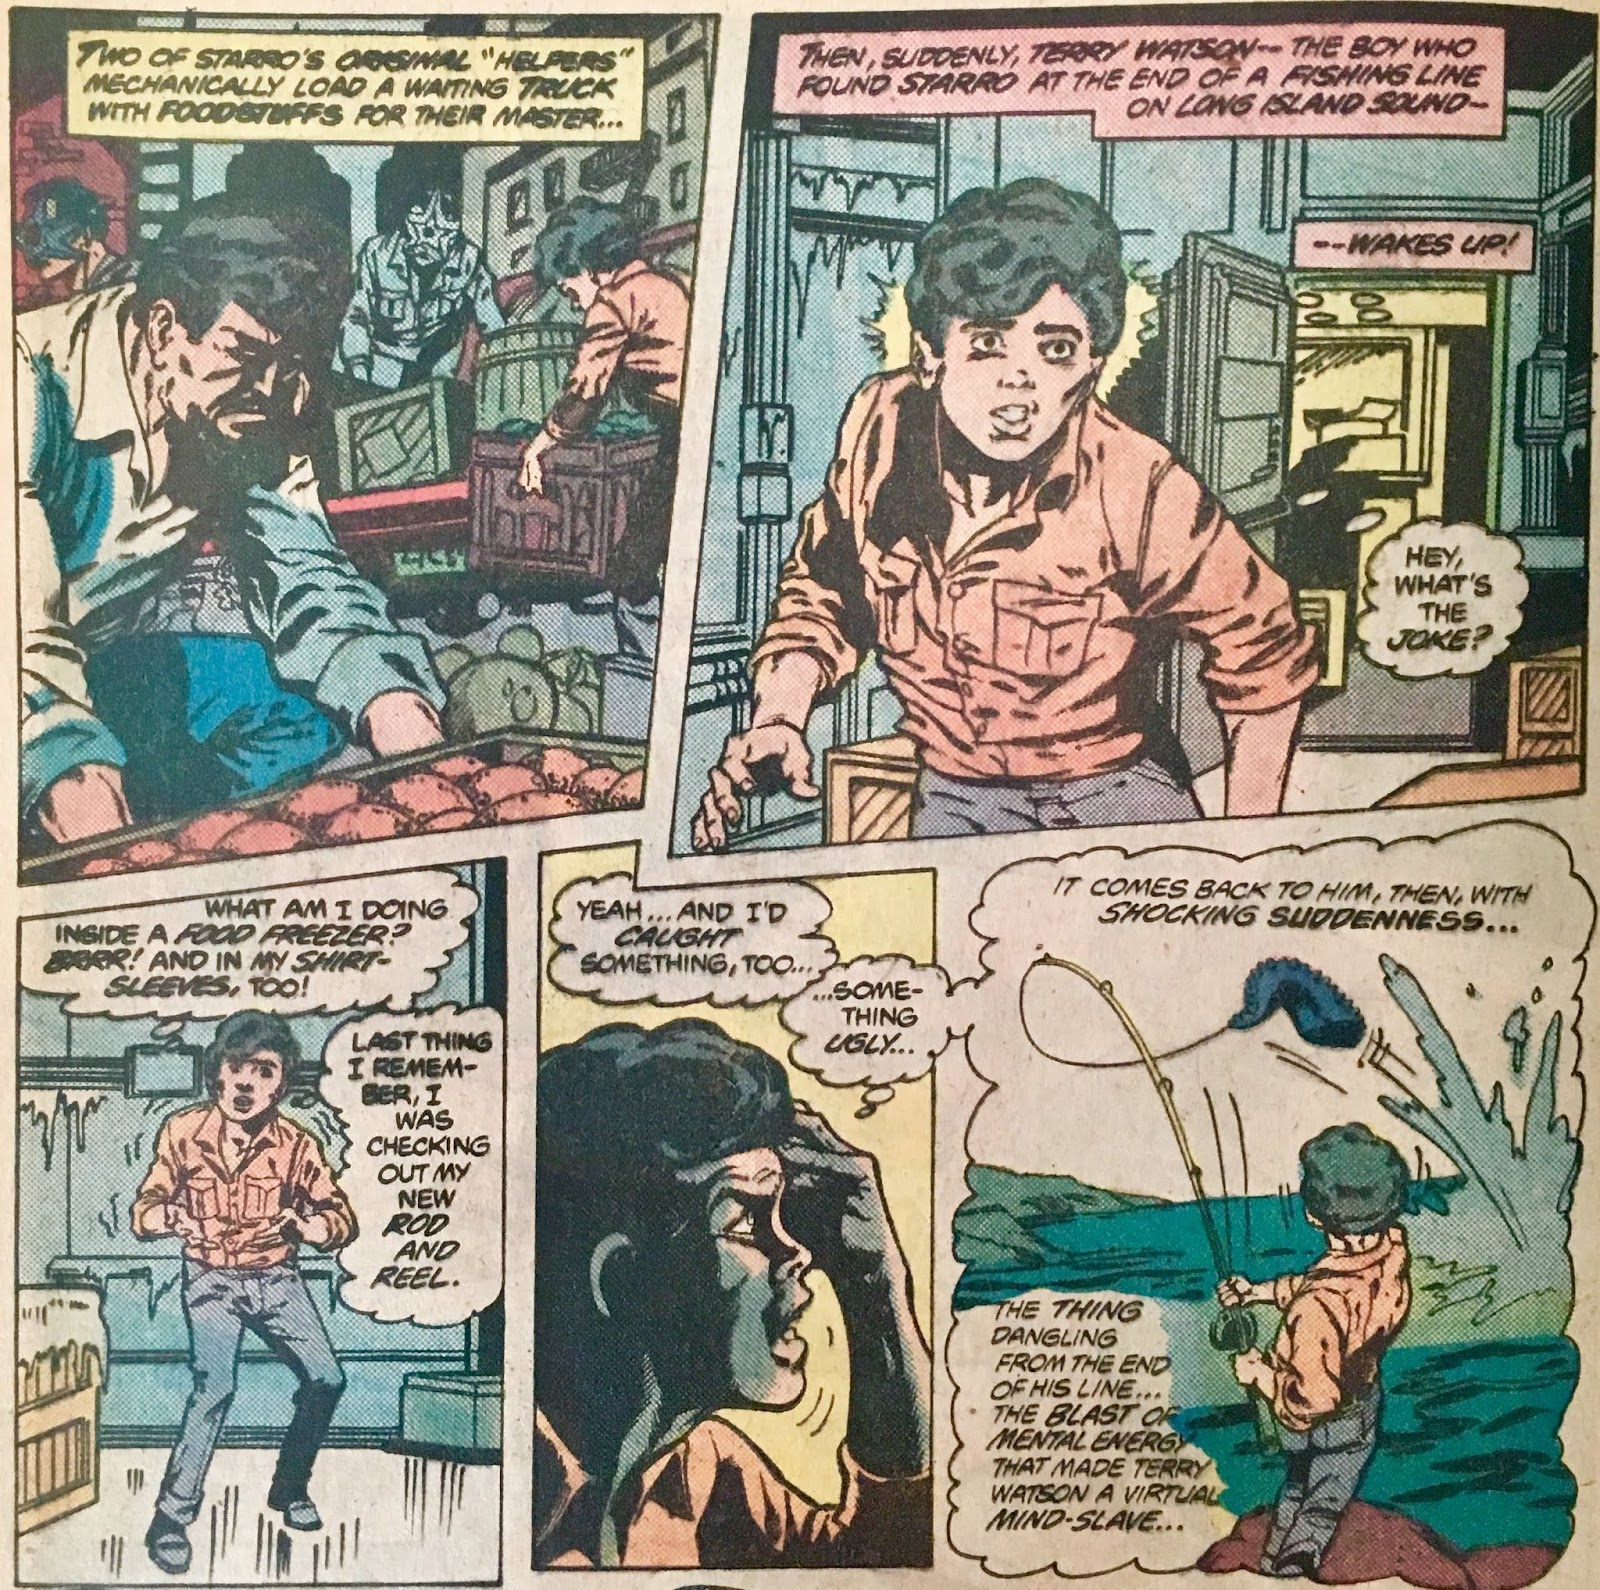 Justice League of America #190 (1981) - Chris is on Infinite Earths